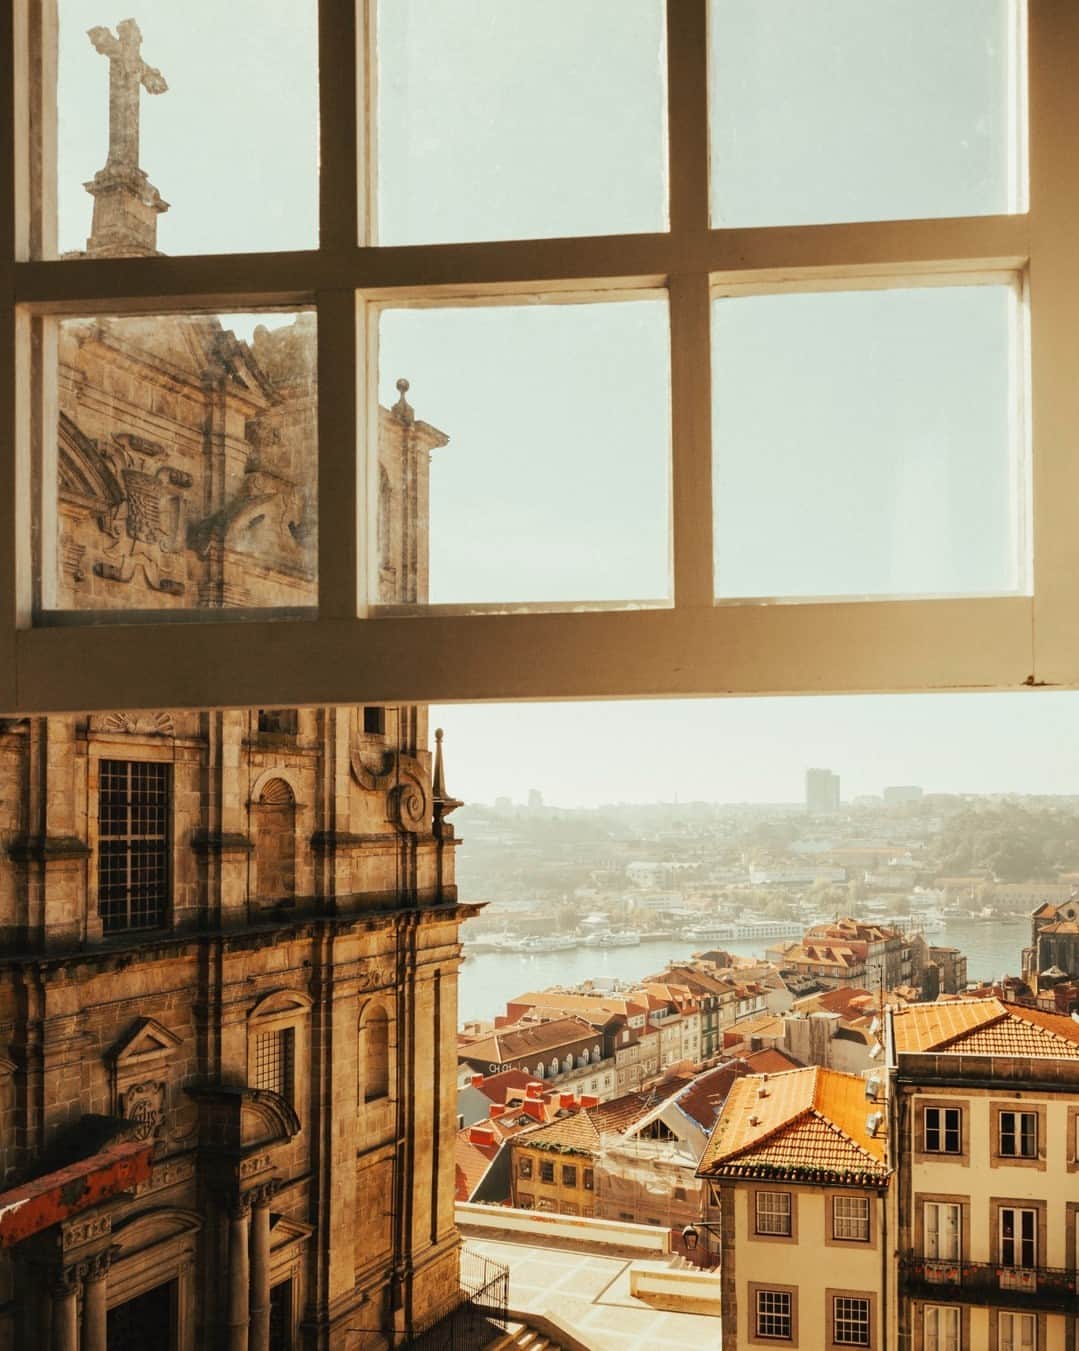 Rosetta Stoneさんのインスタグラム写真 - (Rosetta StoneInstagram)「#Porto is the second largest city in #Portugal with a ton of history and full of culture.  Here are 10 interesting things you might not know about Porto:  1. Porto was originally called Portus Cale, which influenced the name of the country Portugal. Historians argue the name comes from either: - The Gallaeci, a Celtic tribe of Iberia - A Celtic word meaning “port” (the place where boats dock) - The Greek word "Καλλις" meaning “beautiful” (referring to the beauty of the Douro valley) - The Latin word "calidus" meaning "warm" ("Portus Cale" thus meaning "warm port")  2. While Porto developed in the 4th century ACE, the earliest evidence of settlers dates back to the 8th century BCE. This makes Porto one of the oldest European cities.  3. Porto is fondly called “Invicta”, which means "invincible" in Portuguese. This nickname comes from the 19th century Portuguese civil war when the enemy failed to conquer the city.  4. In 1415, Porto residents donated all of their meat reserves to soldiers for the conquest of Ceuta, which left them with only animal tripe to eat. After that, the people of Porto were called "Tripeiros" (tripe-eaters). The nickname stuck and is still used today.   5. Porto is known as the city of bridges due to its 6 iconic bridges that span the Douro River.   6. The Sao Bento train station in Porto is considered one of the most beautiful train stations in the world.  7. Port wine comes from this region. This fortified wine is widely accepted as the city’s dessert wine, especially as it is made along the Douro River.  8. A Francesinha is the city’s typical dish. This sandwich is made with different kinds of meat and sausage, cheese, and a delicious tomato beer sauce.  9. One of the largest street festivals in the world takes place in Porto on June 23 to celebrate the patron saint of the city – Saint John. Quirky traditions during Festa de São João do Porto include smashing each other's head with plastic hammers, jumping over bonfires (to prove your courage), and offering friends basil plants decorated with handwritten poems.  10. The historic center of Porto was declared a World Heritage Site by UNESCO in 1996.  Will you add Porto to your #bucketlist?」4月17日 0時06分 - rosettastone